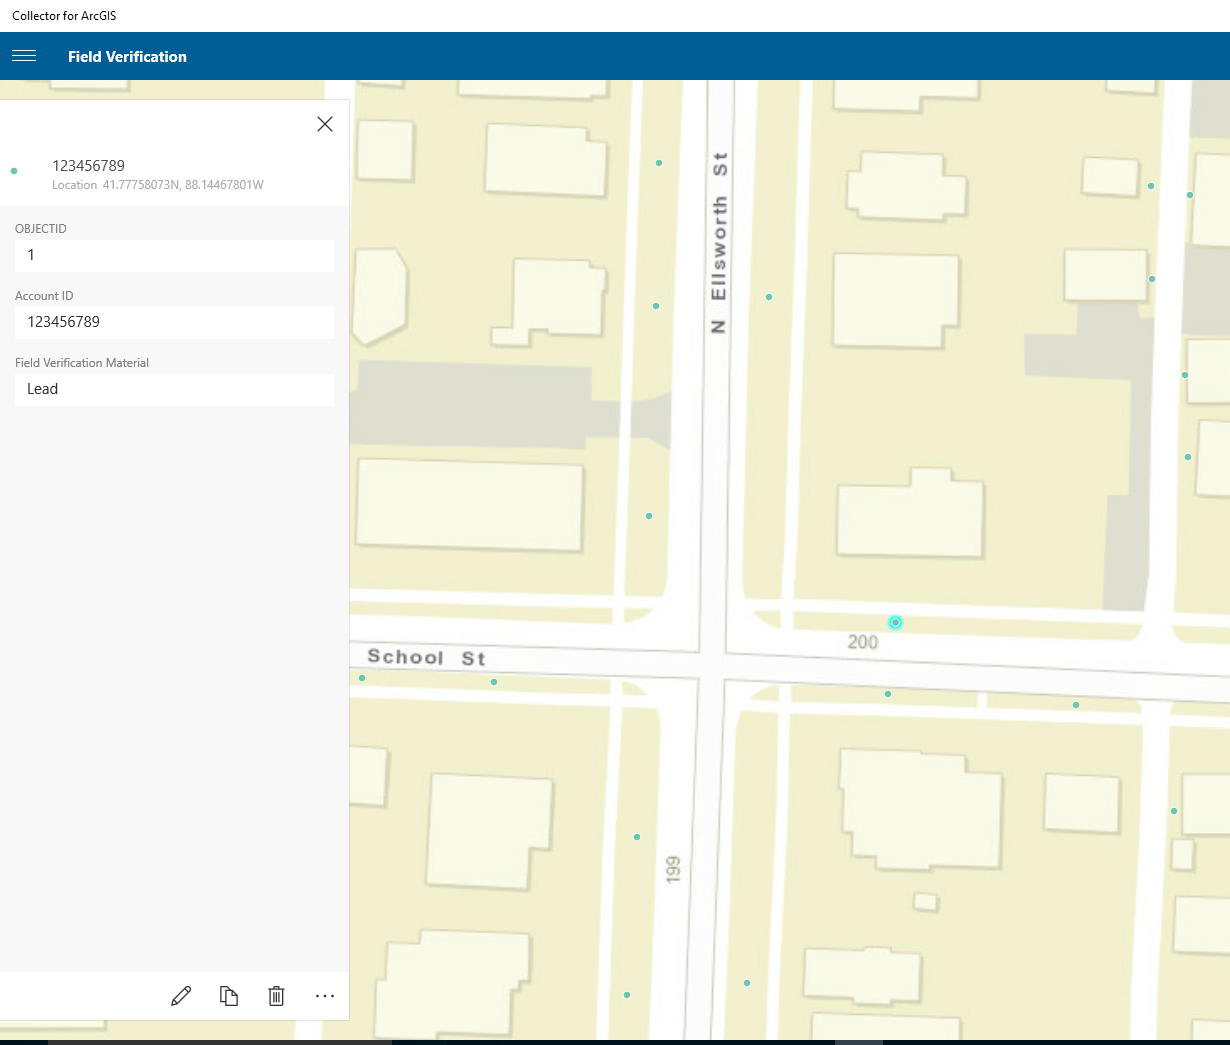 Field Verification map in ArcGIS Collector